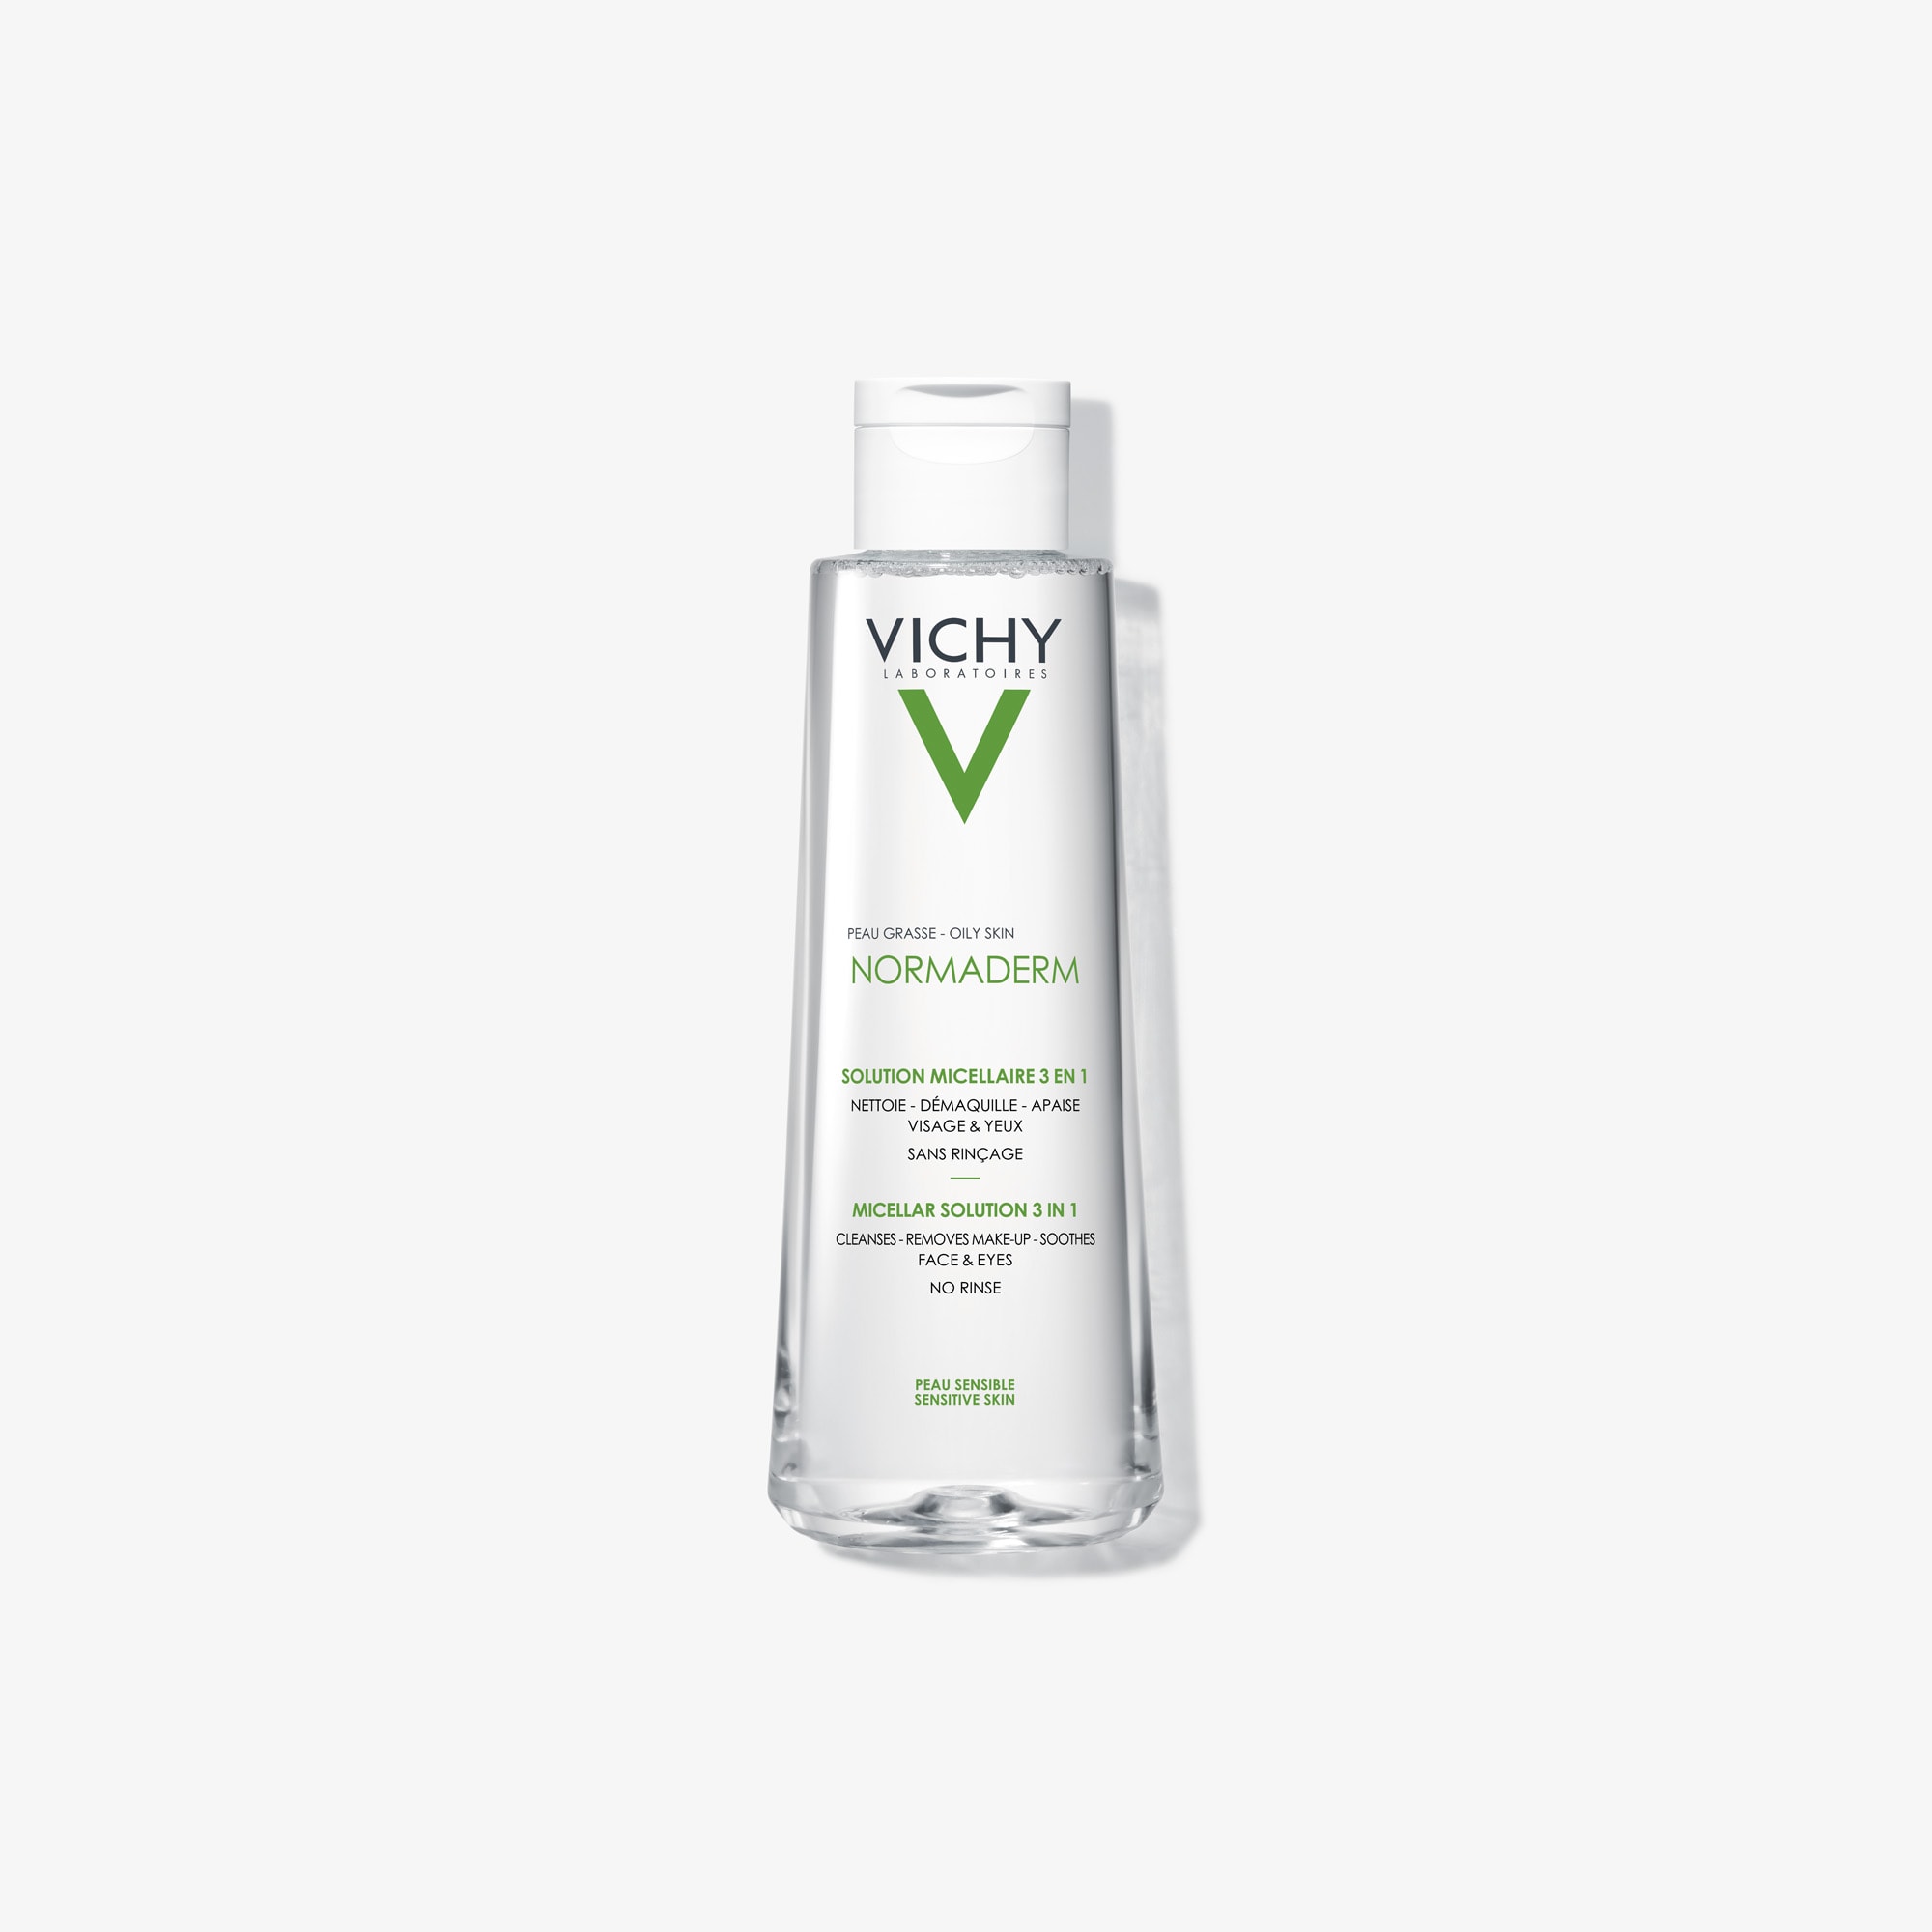 VIC_139_VICHY_NORMADERM_3 in 1 Micellar Solution